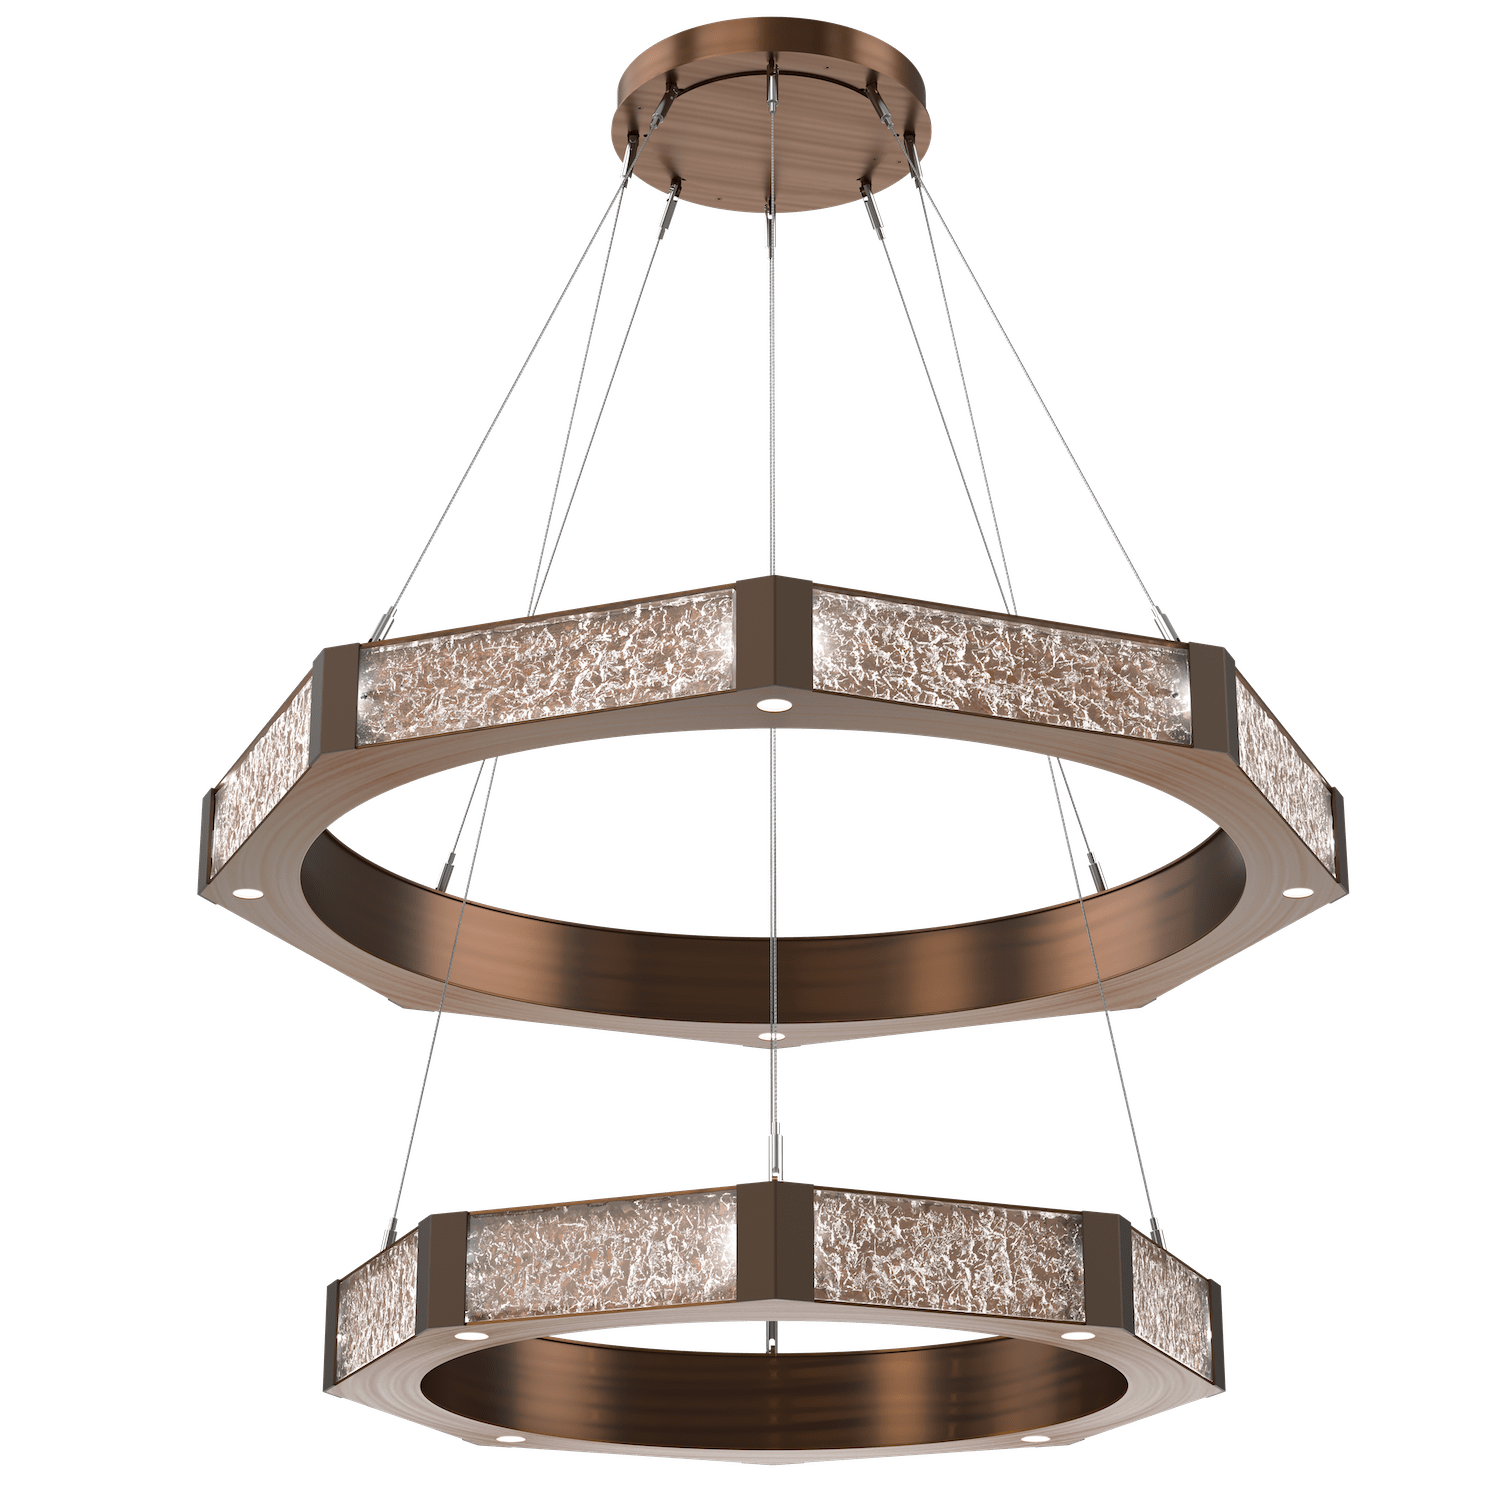 CHB0061-2B-RB-GC-Hammerton-Studio-Glacier-48-inch-two-tier-ring-chandelier-with-oil-rubbed-bronze-finish-and-clear-blown-glass-with-geo-clear-cast-glass-diffusers-and-LED-lamping